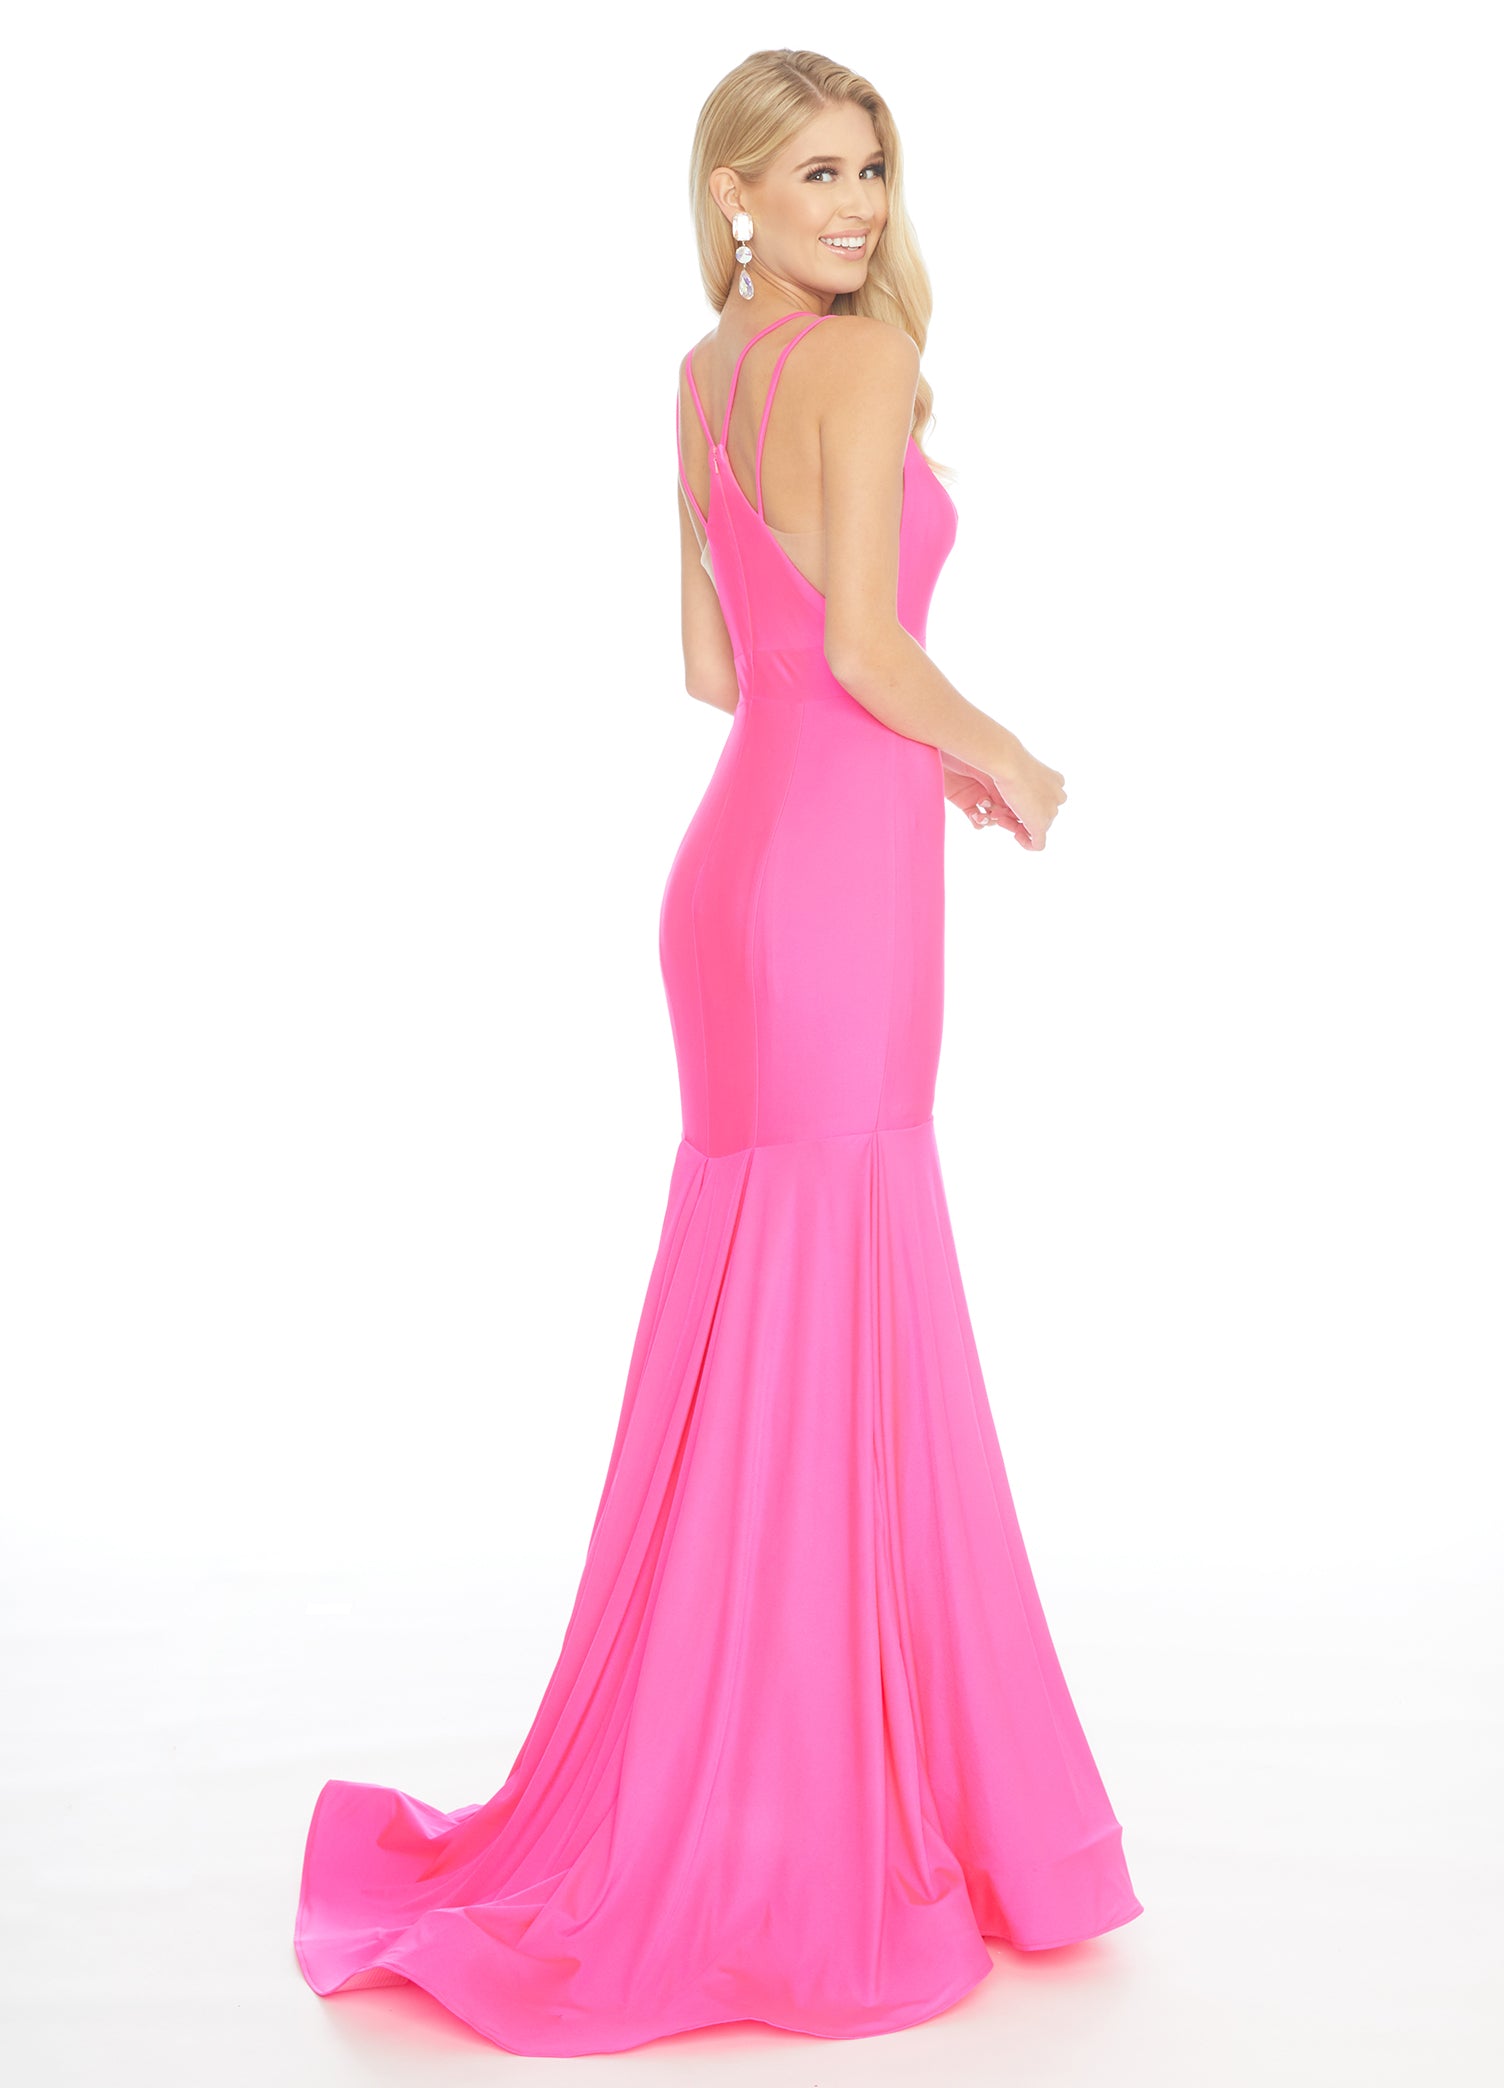 Ashley Lauren 1870 This stunning fit & flare evening gown is sure to turn heads! The bustier is has a v-neckline complete with double spaghetti straps and illusion panel sides. The skirt embellished with box-pleats and sweeping train. Racer Back Jersey